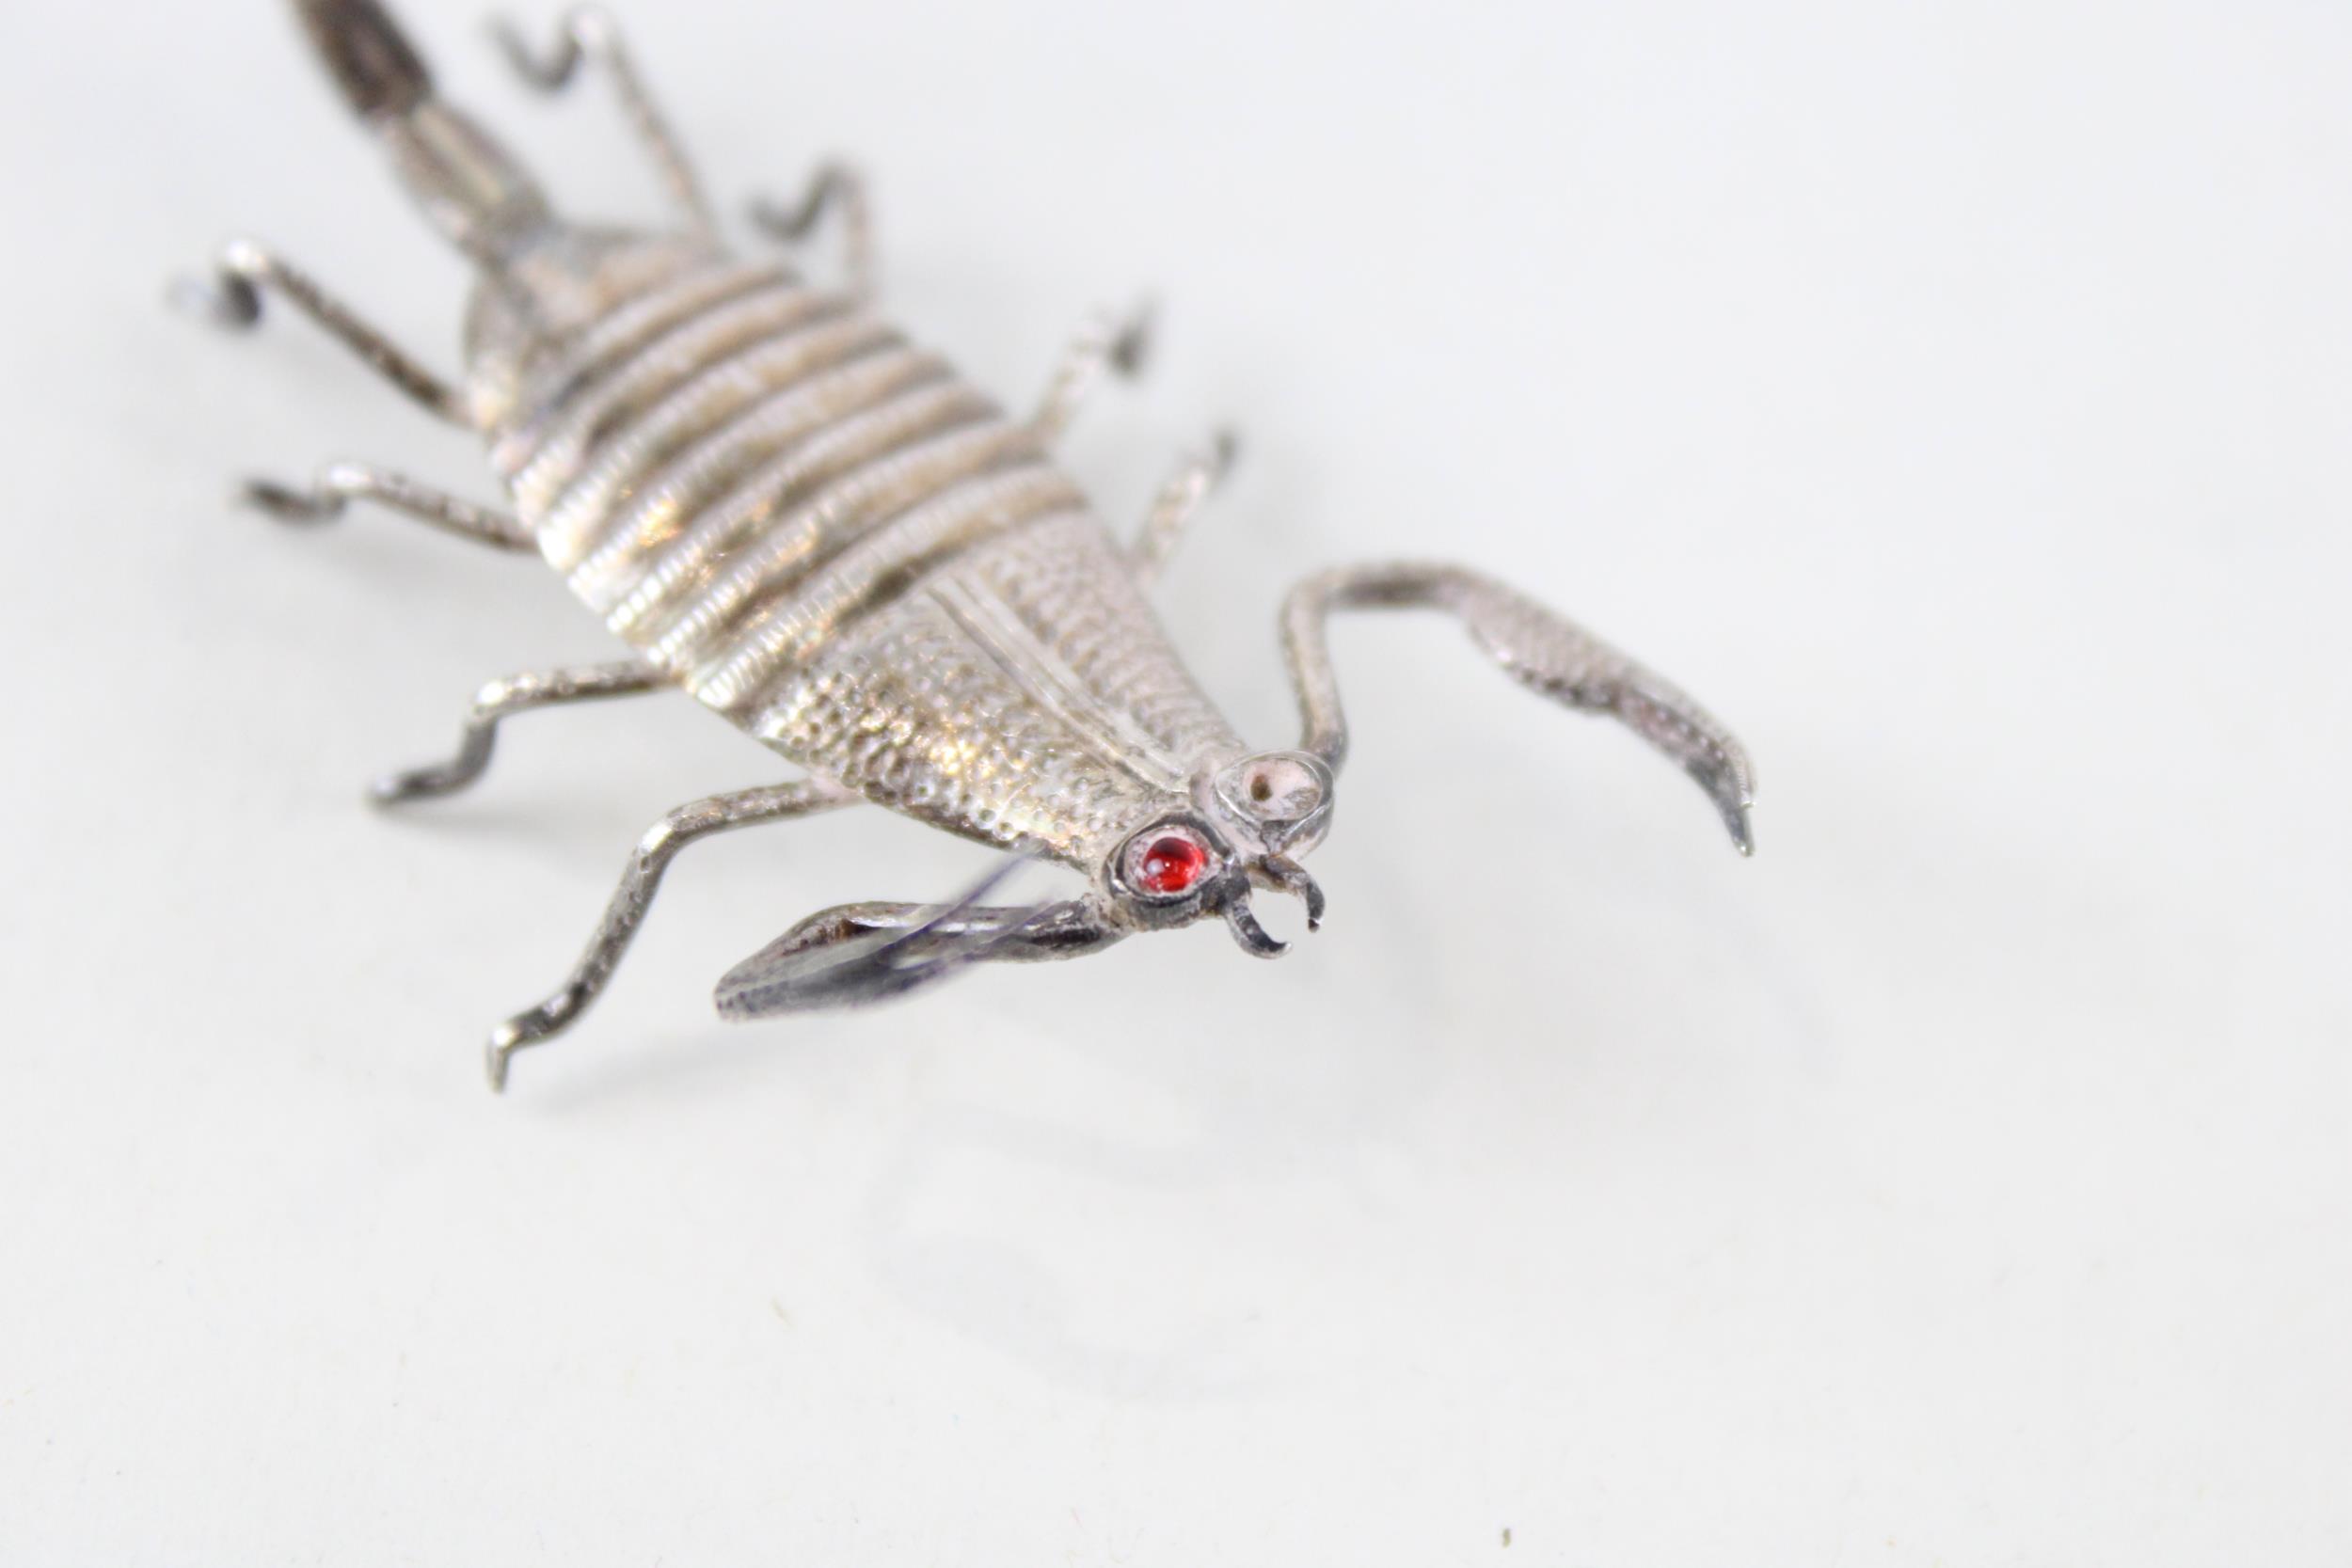 Antique / Vintage .950 SILVER Scorpion Hair Accessory / Figurine (6g) // Length - 5.2cm XRF TESTED - Image 2 of 5